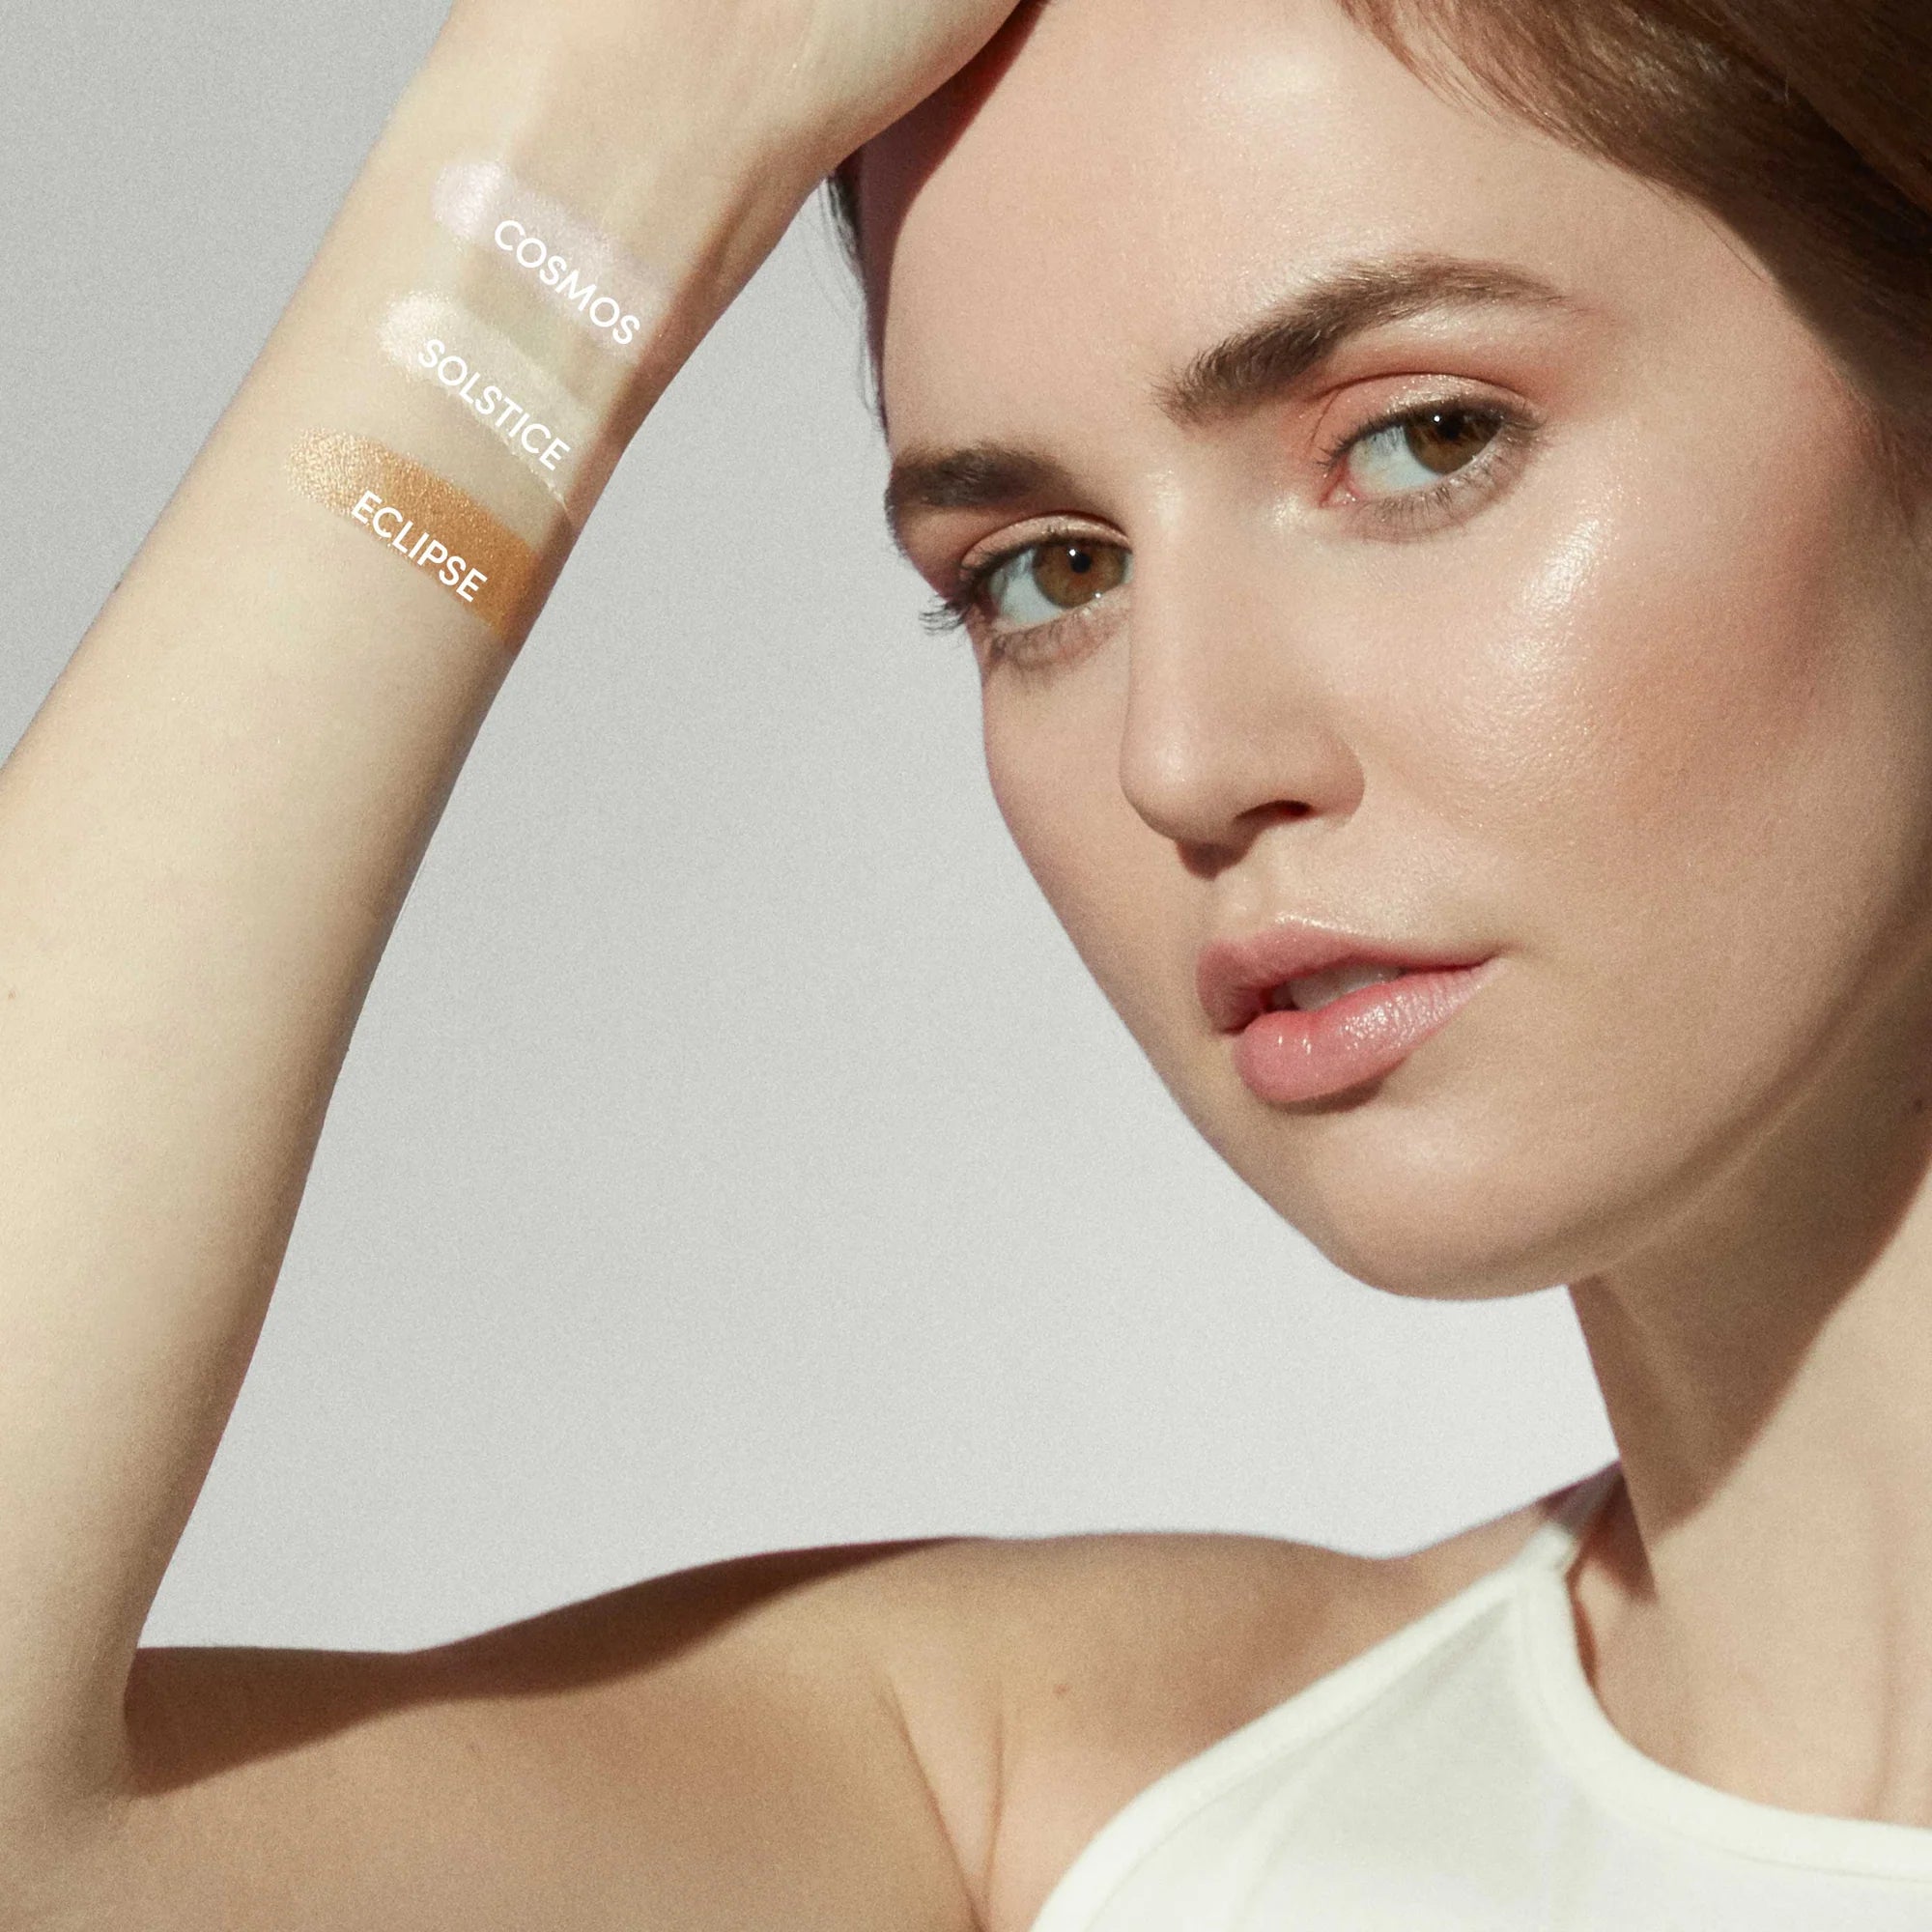 Jane Iredale's Glow Time Highlighter Sticks swatches in the woman's arm.